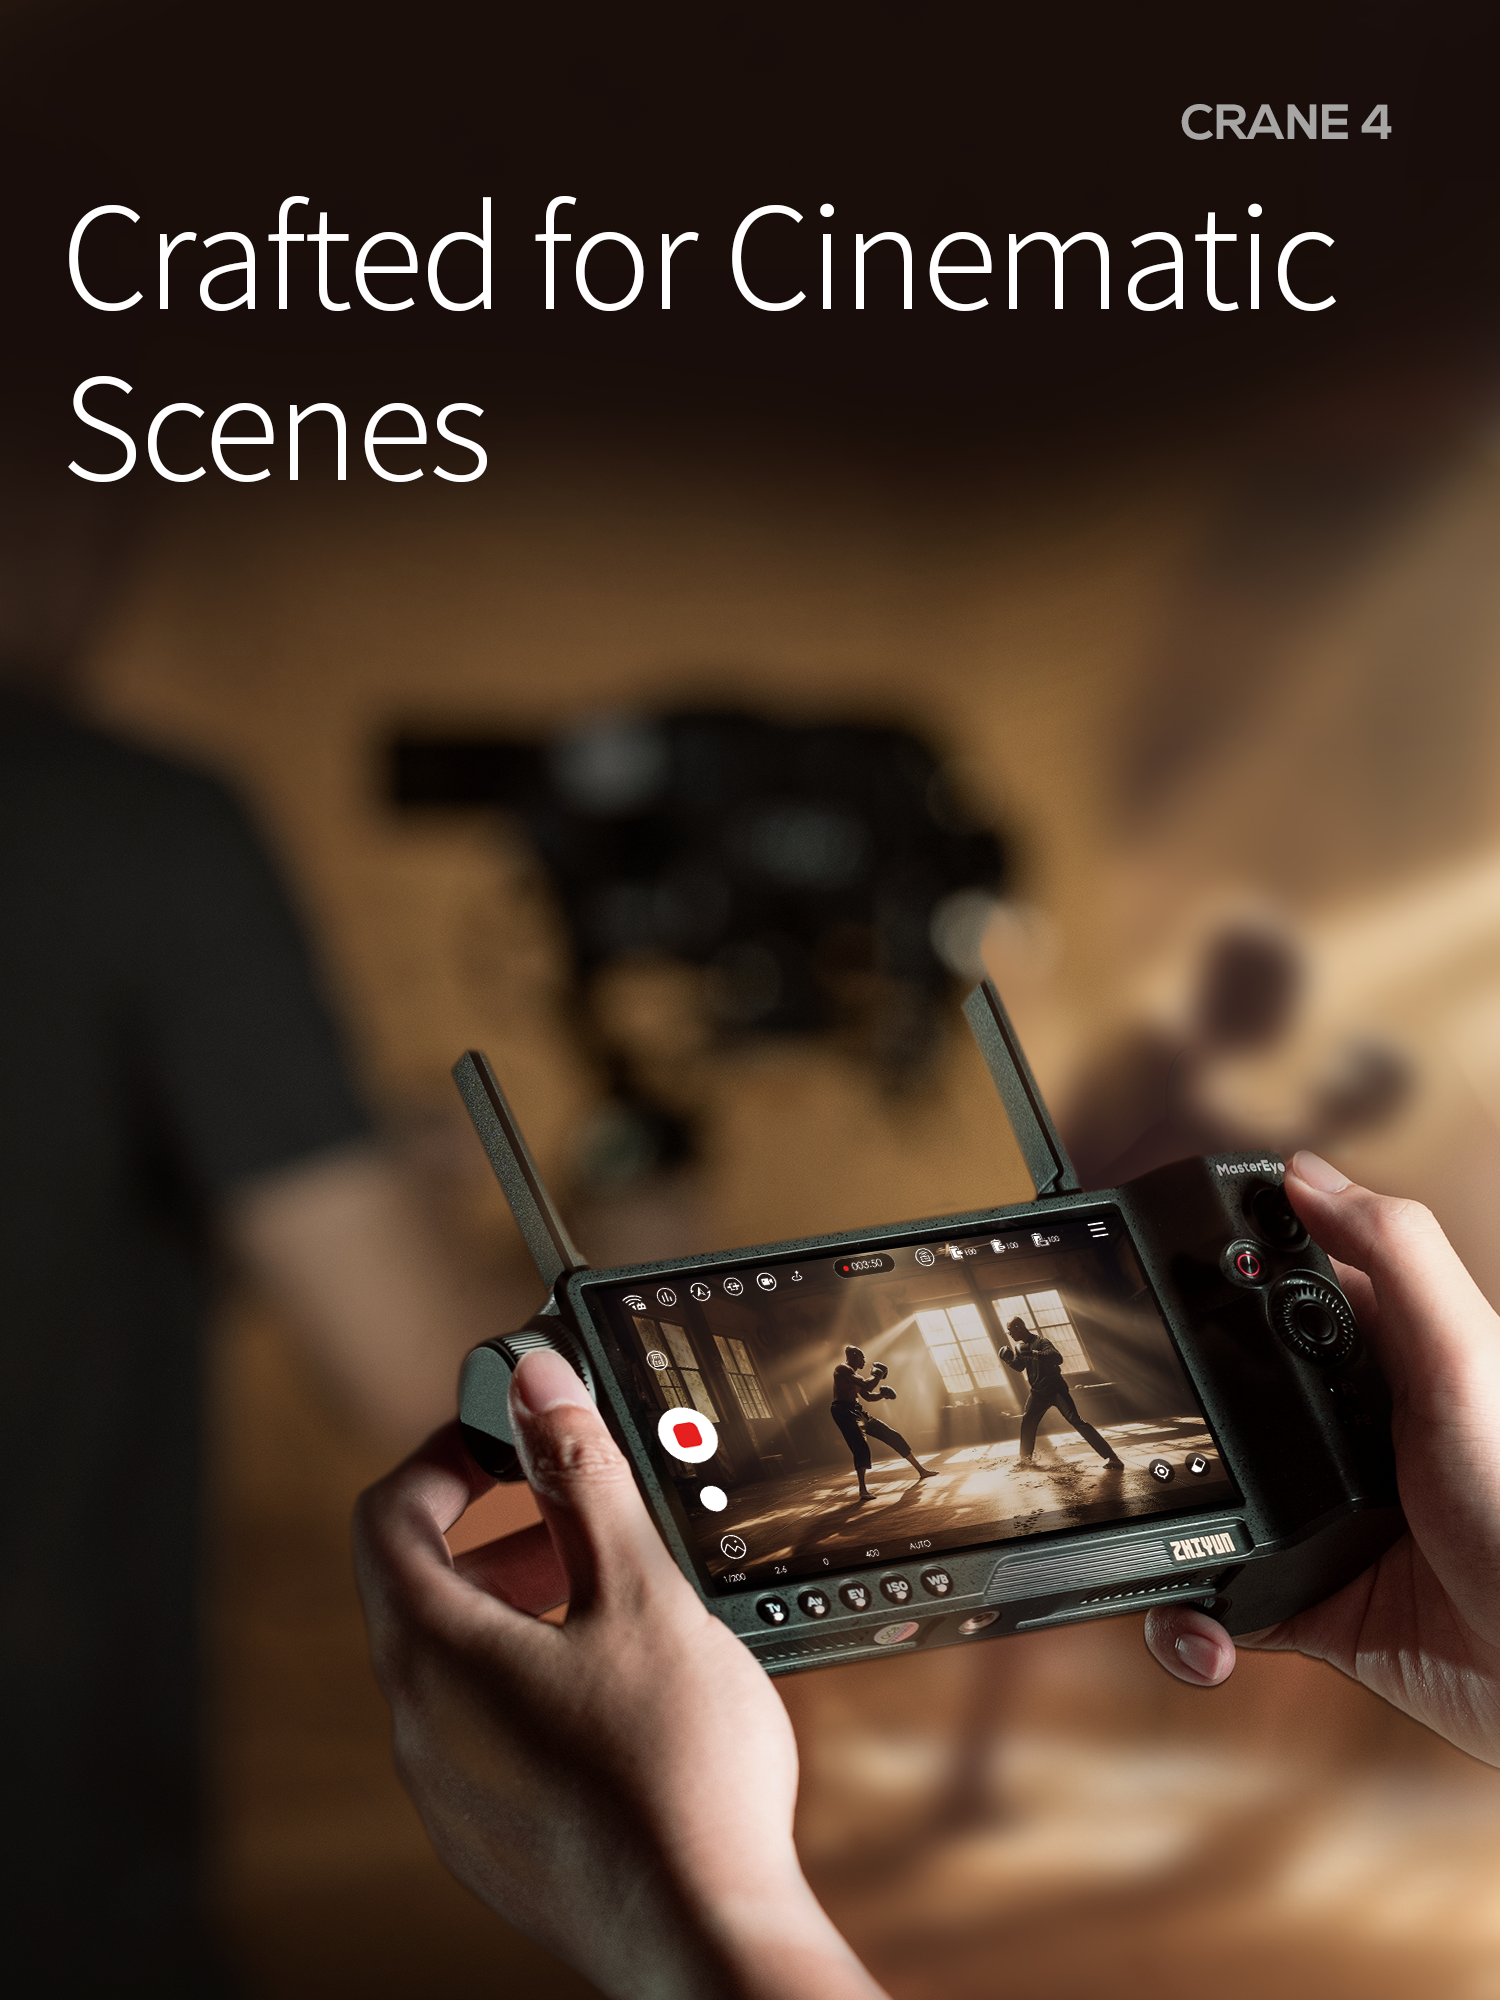 Crafted for Cinematic Scenes